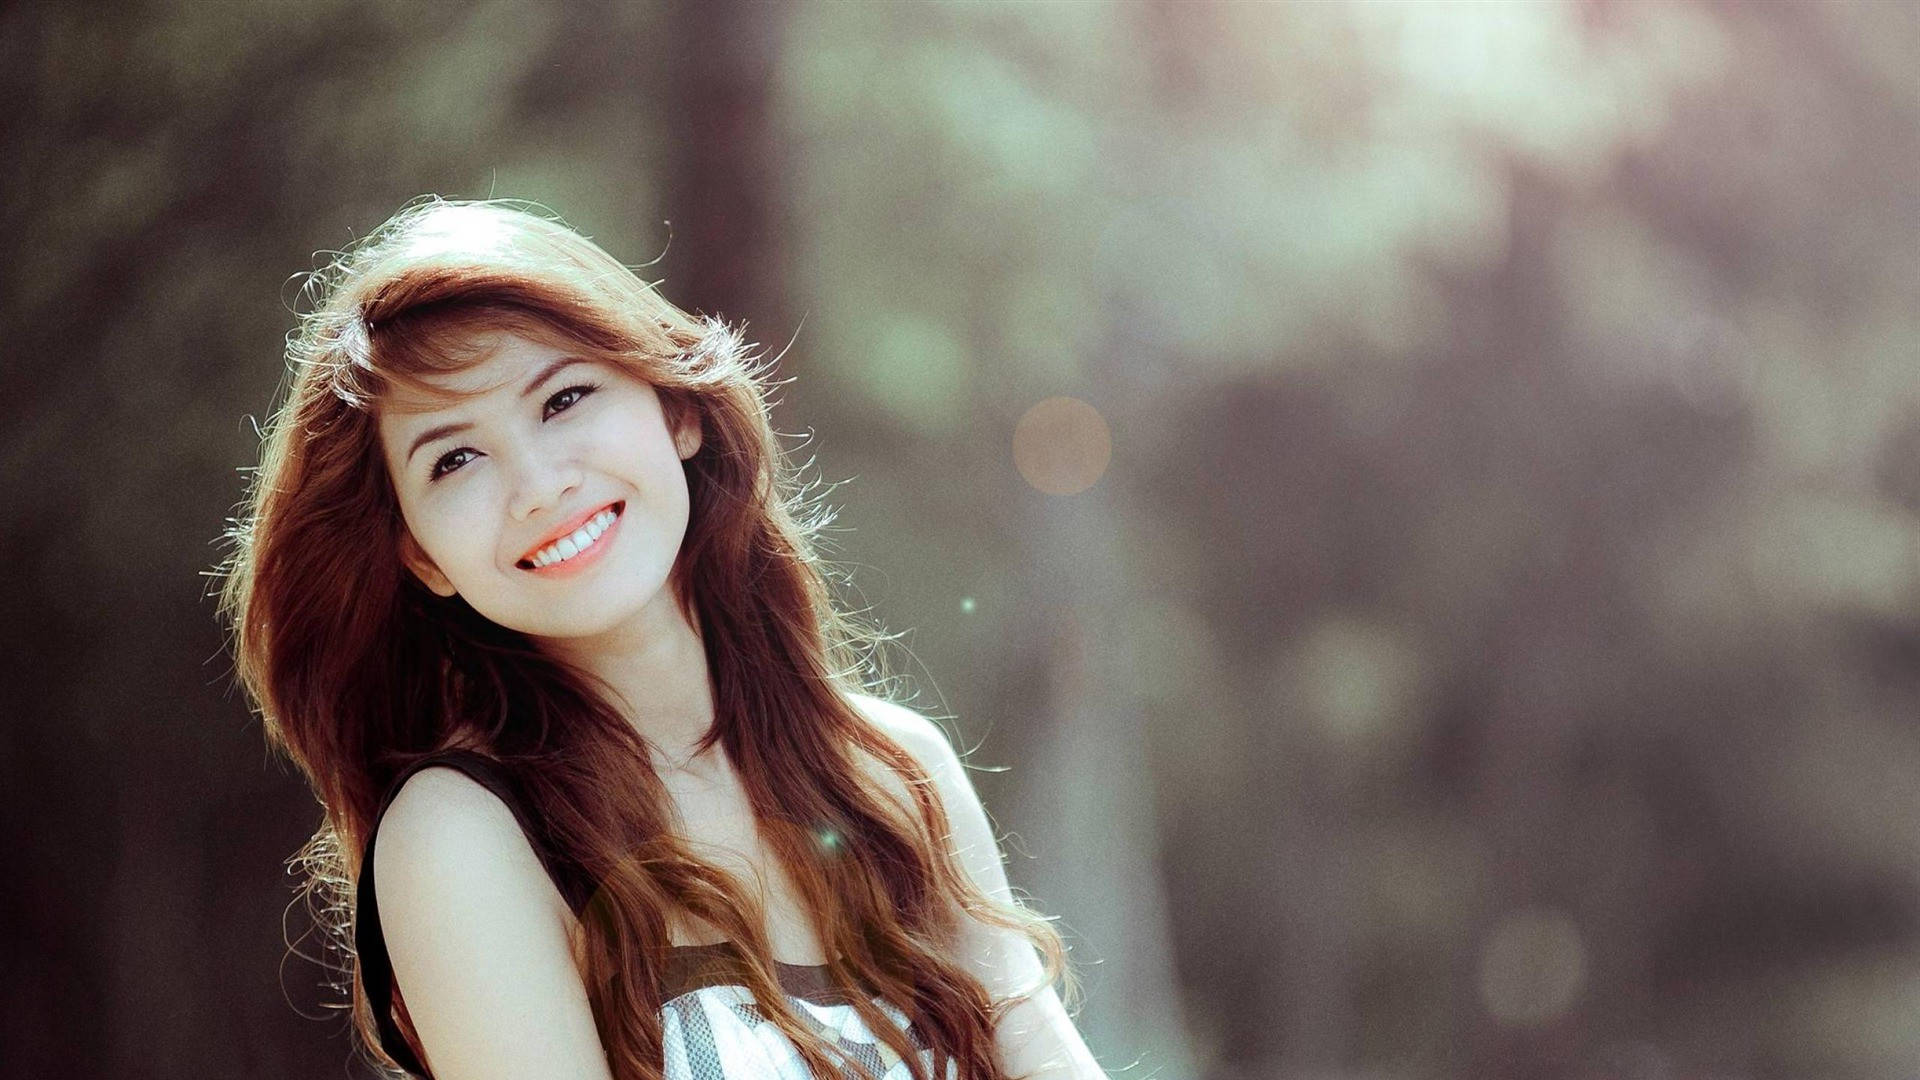 Cute Woman Smiling Background